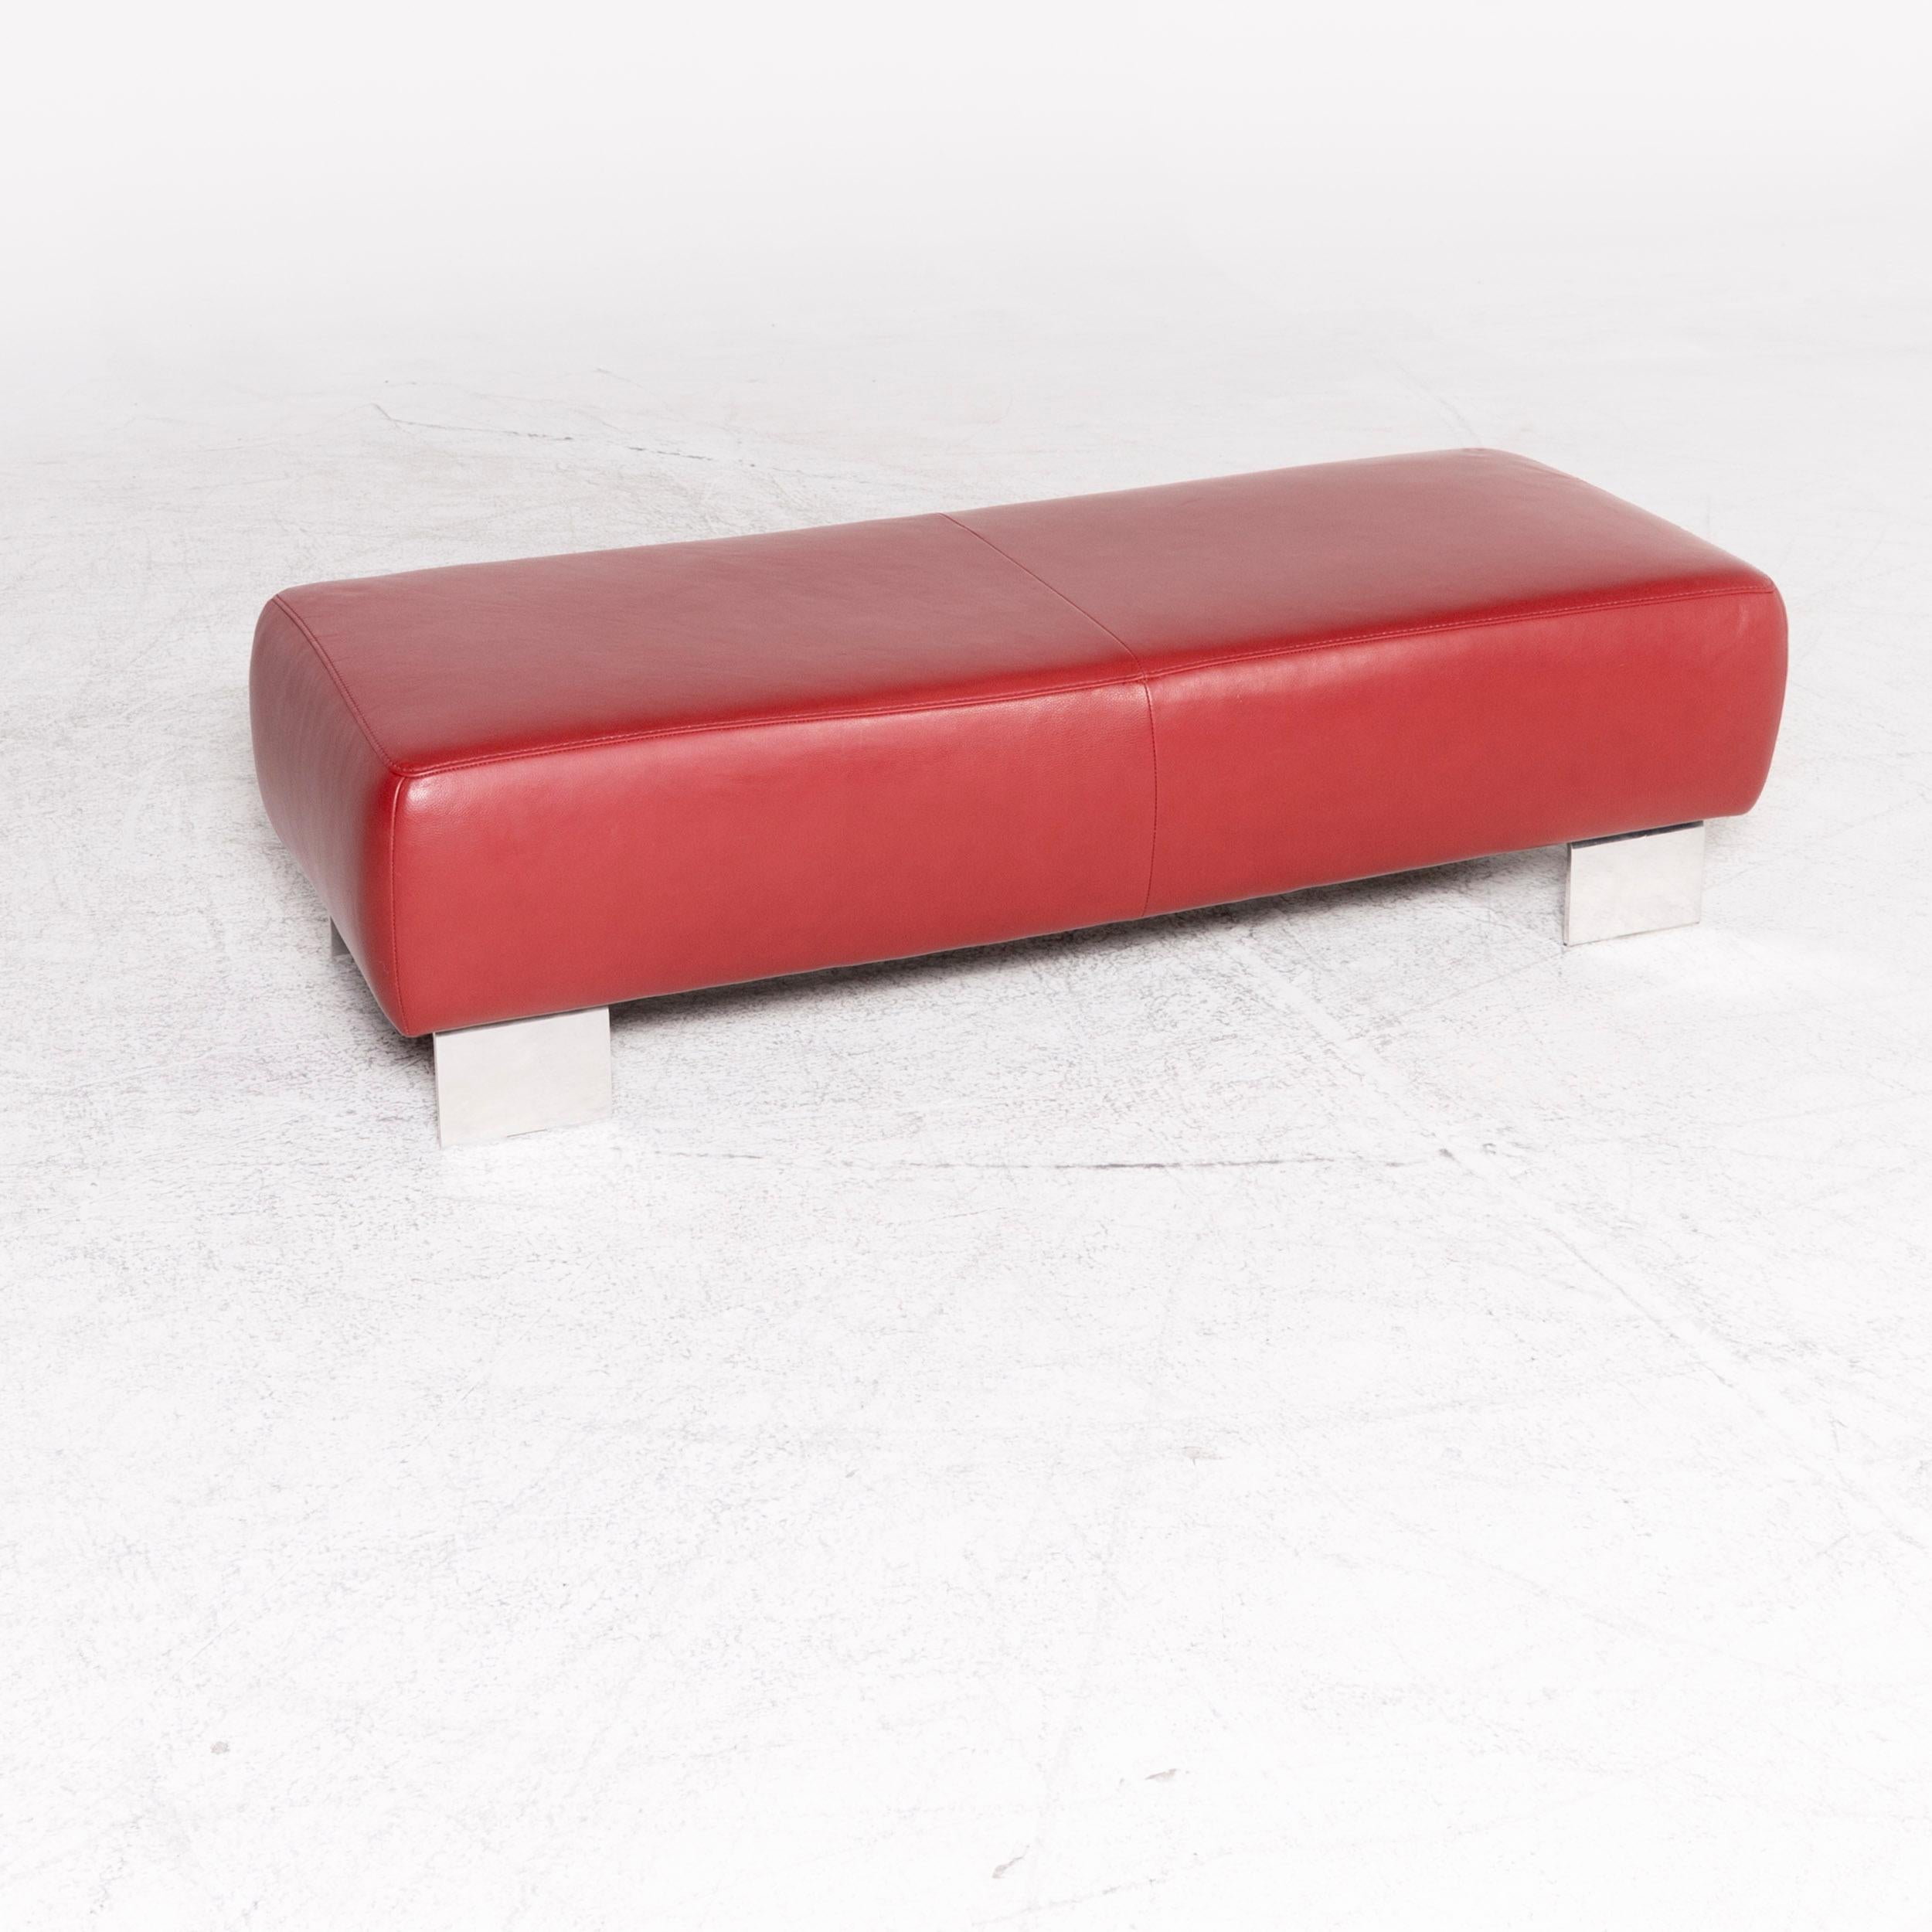 We bring to you a Willi Schillig Taboo designer leather stool red genuine leather stool.
 

Product measures in centimeters:

Depth: 60
Width: 146
Height: 41.




 